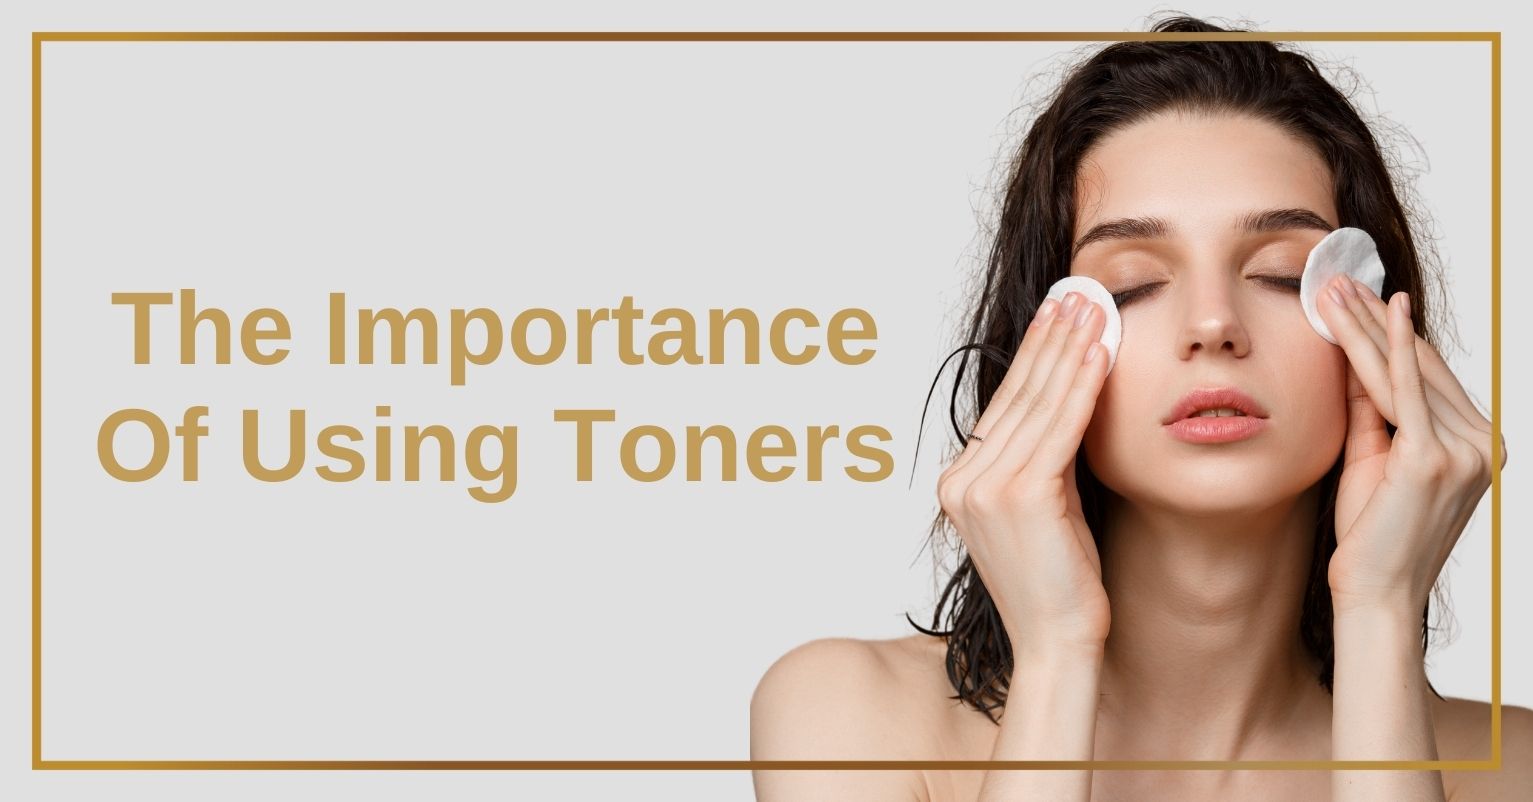 The Importance Of Using Toners